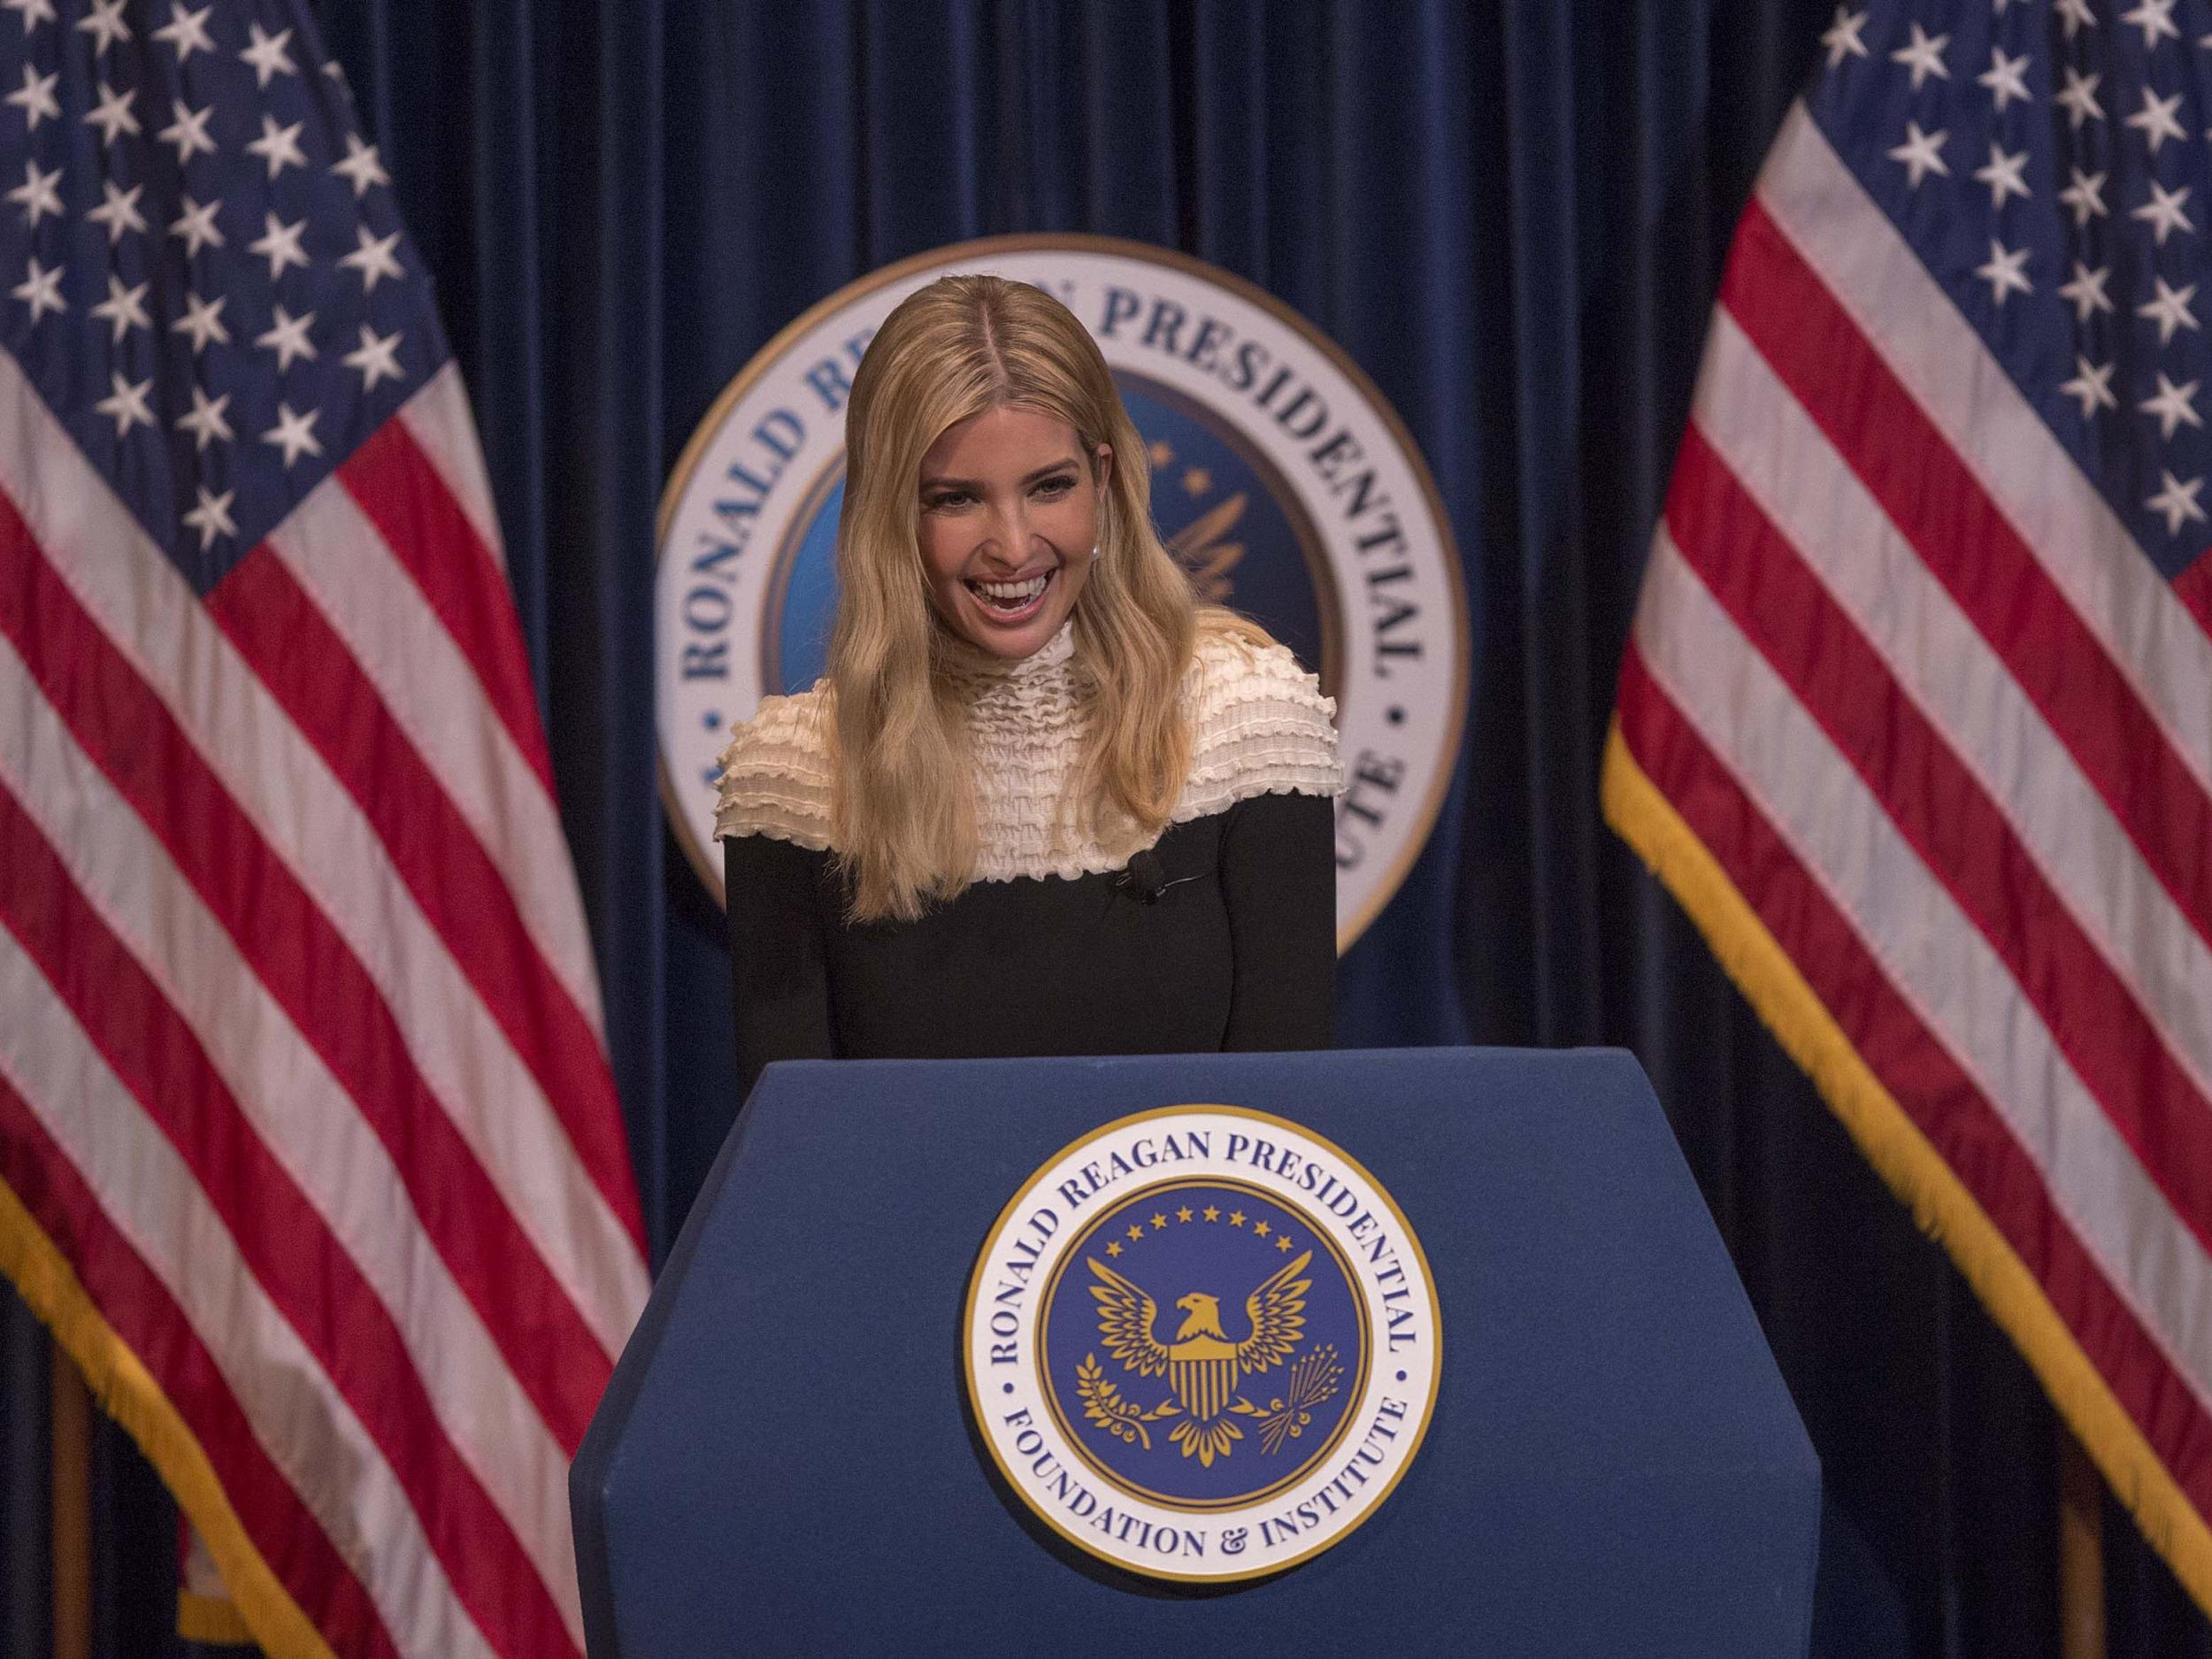 The book claims that Jared Kushner and Ivanka Trump made a deal that Ivanka could run for president